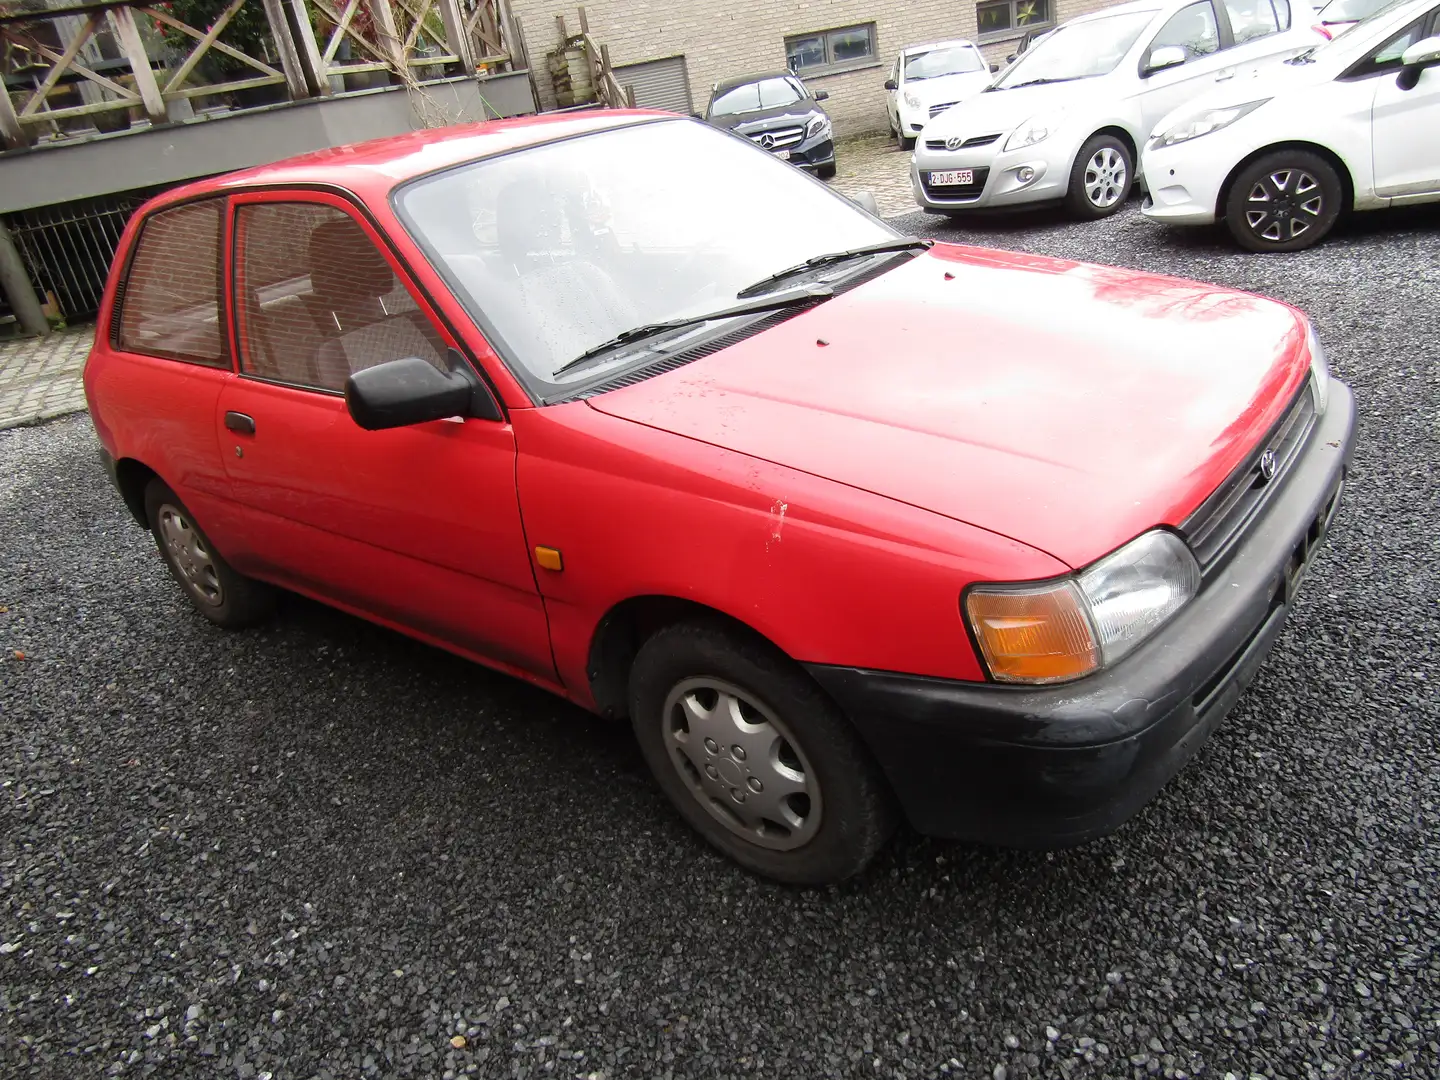 Toyota Starlet 1.0i (immatriculation ancêtre possible) 32 ans Piros - 1